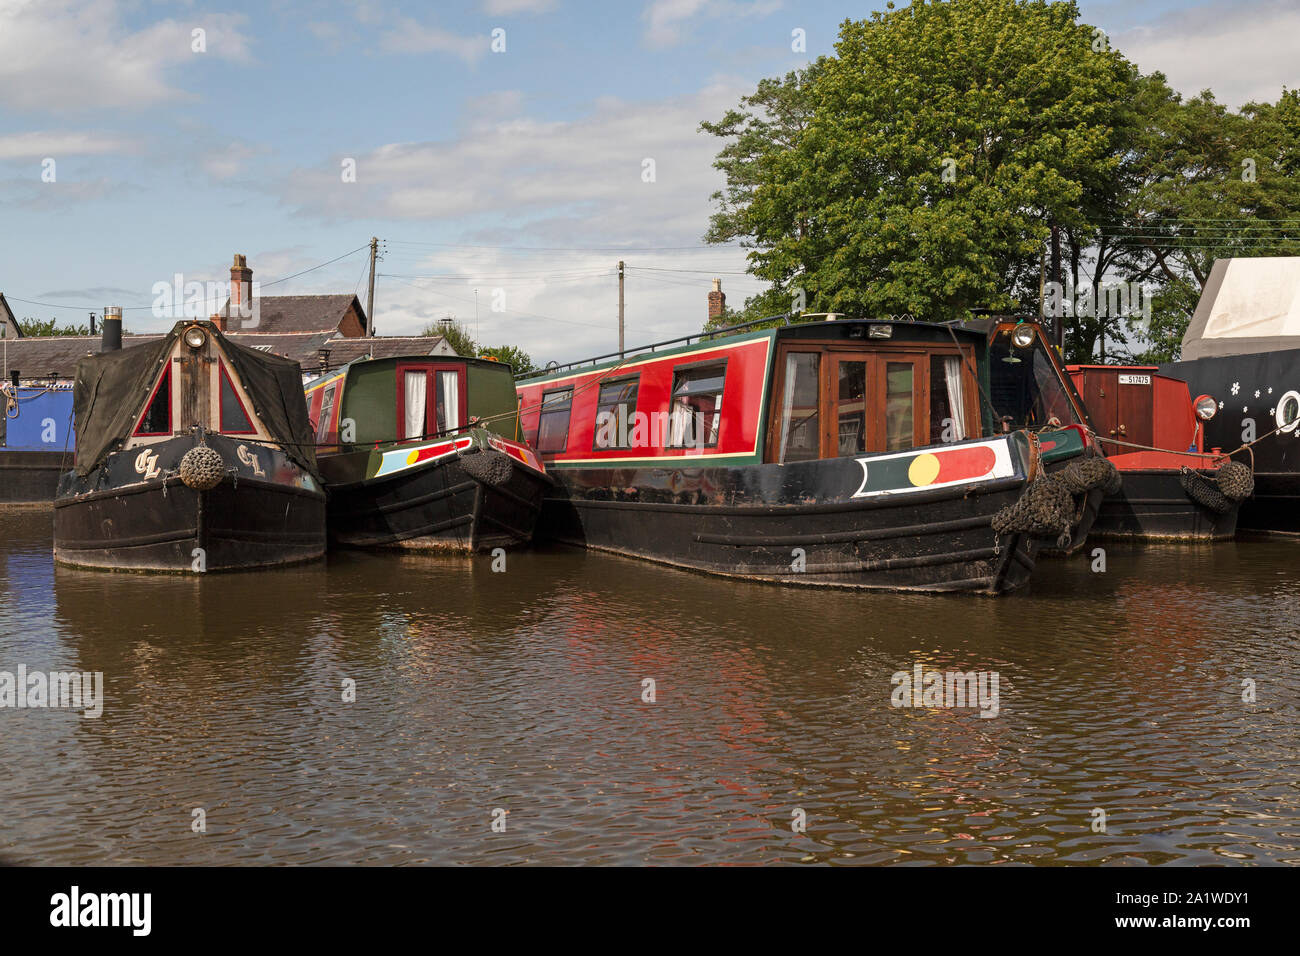 Narrow Boats, or Barges, moored up at Norbury Wharf on The Shropshire Union Canal in England. Stock Photo